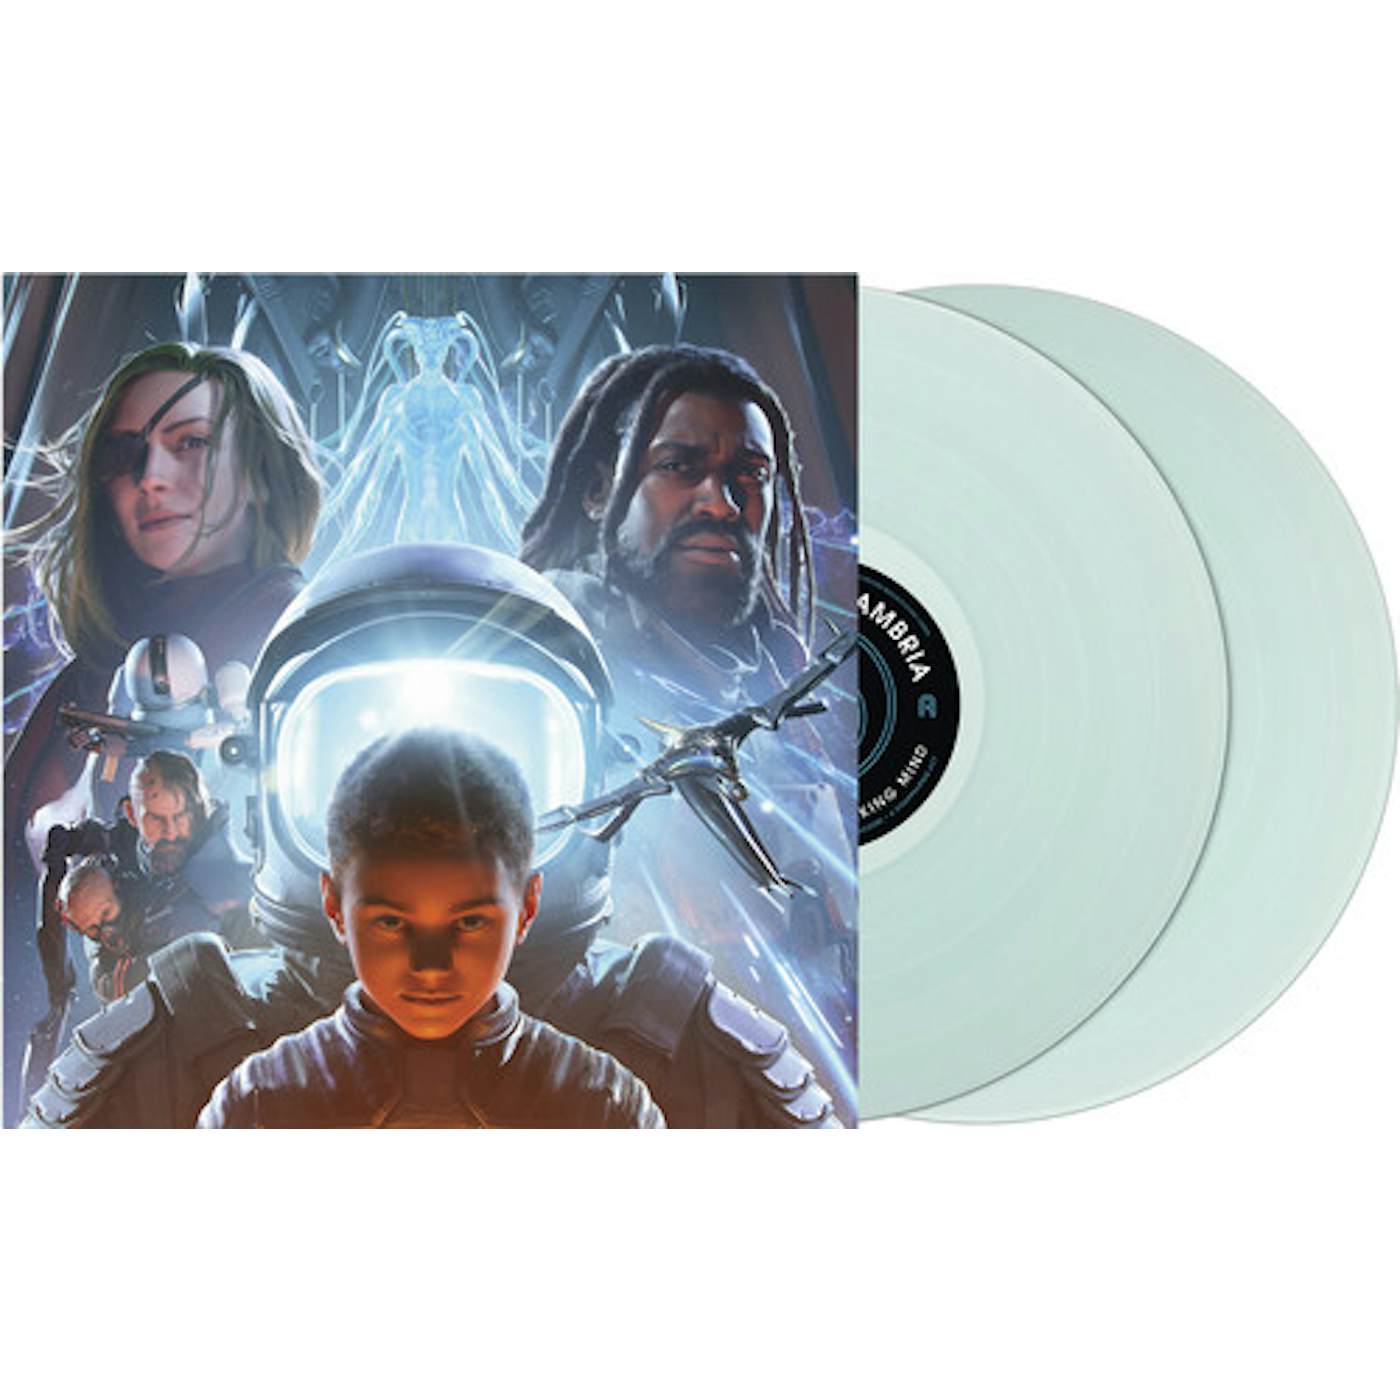 Coheed and Cambria Vaxis II: A Window of the Waking Mind (2LP/Transparent Electric Blue) Vinyl Record